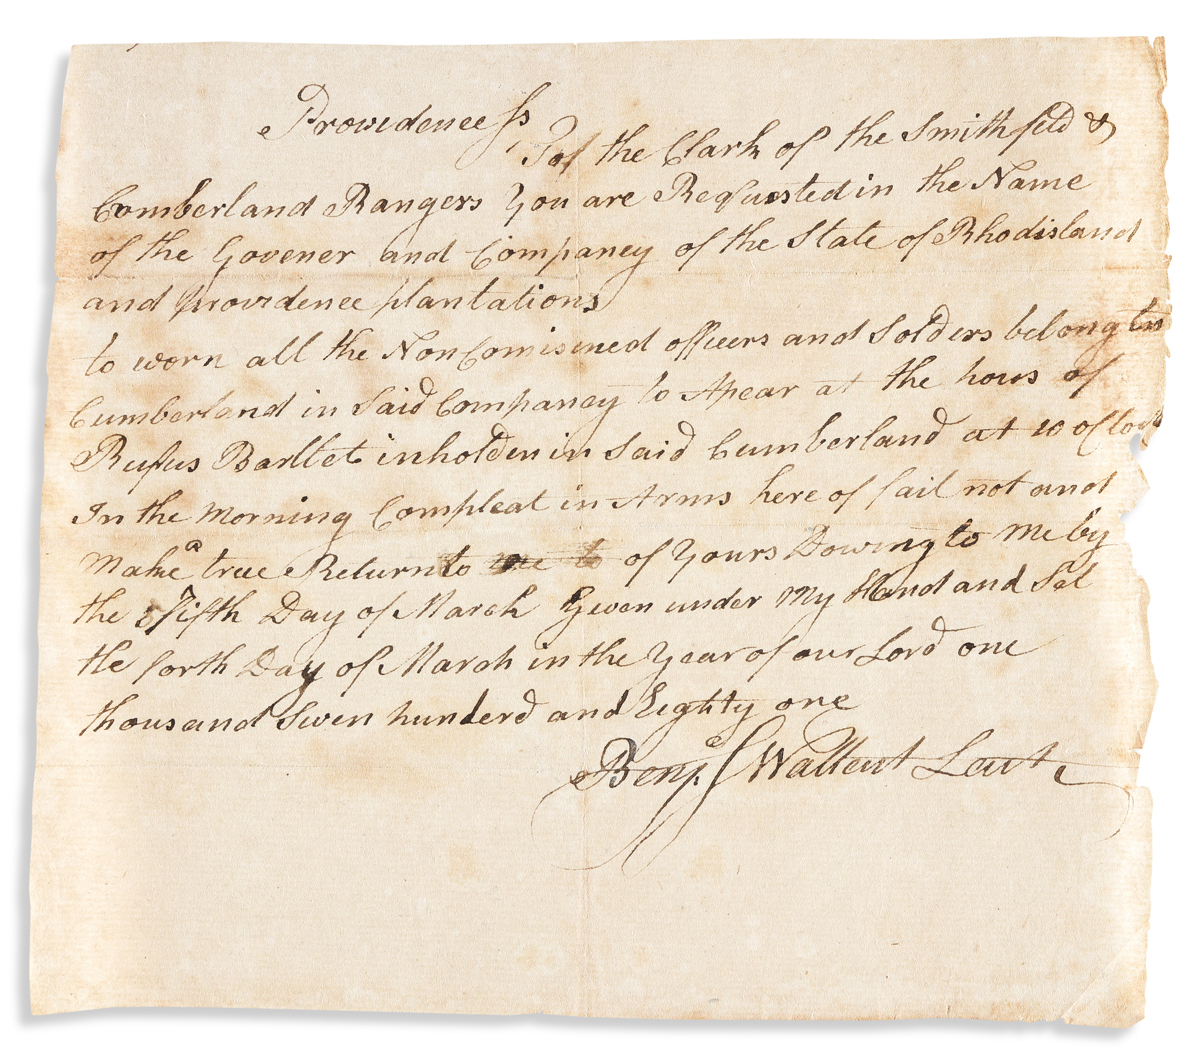 (AMERICAN REVOLUTION--1781.) The Smithfield and Cumberland Rangers militia company is summoned for muster.